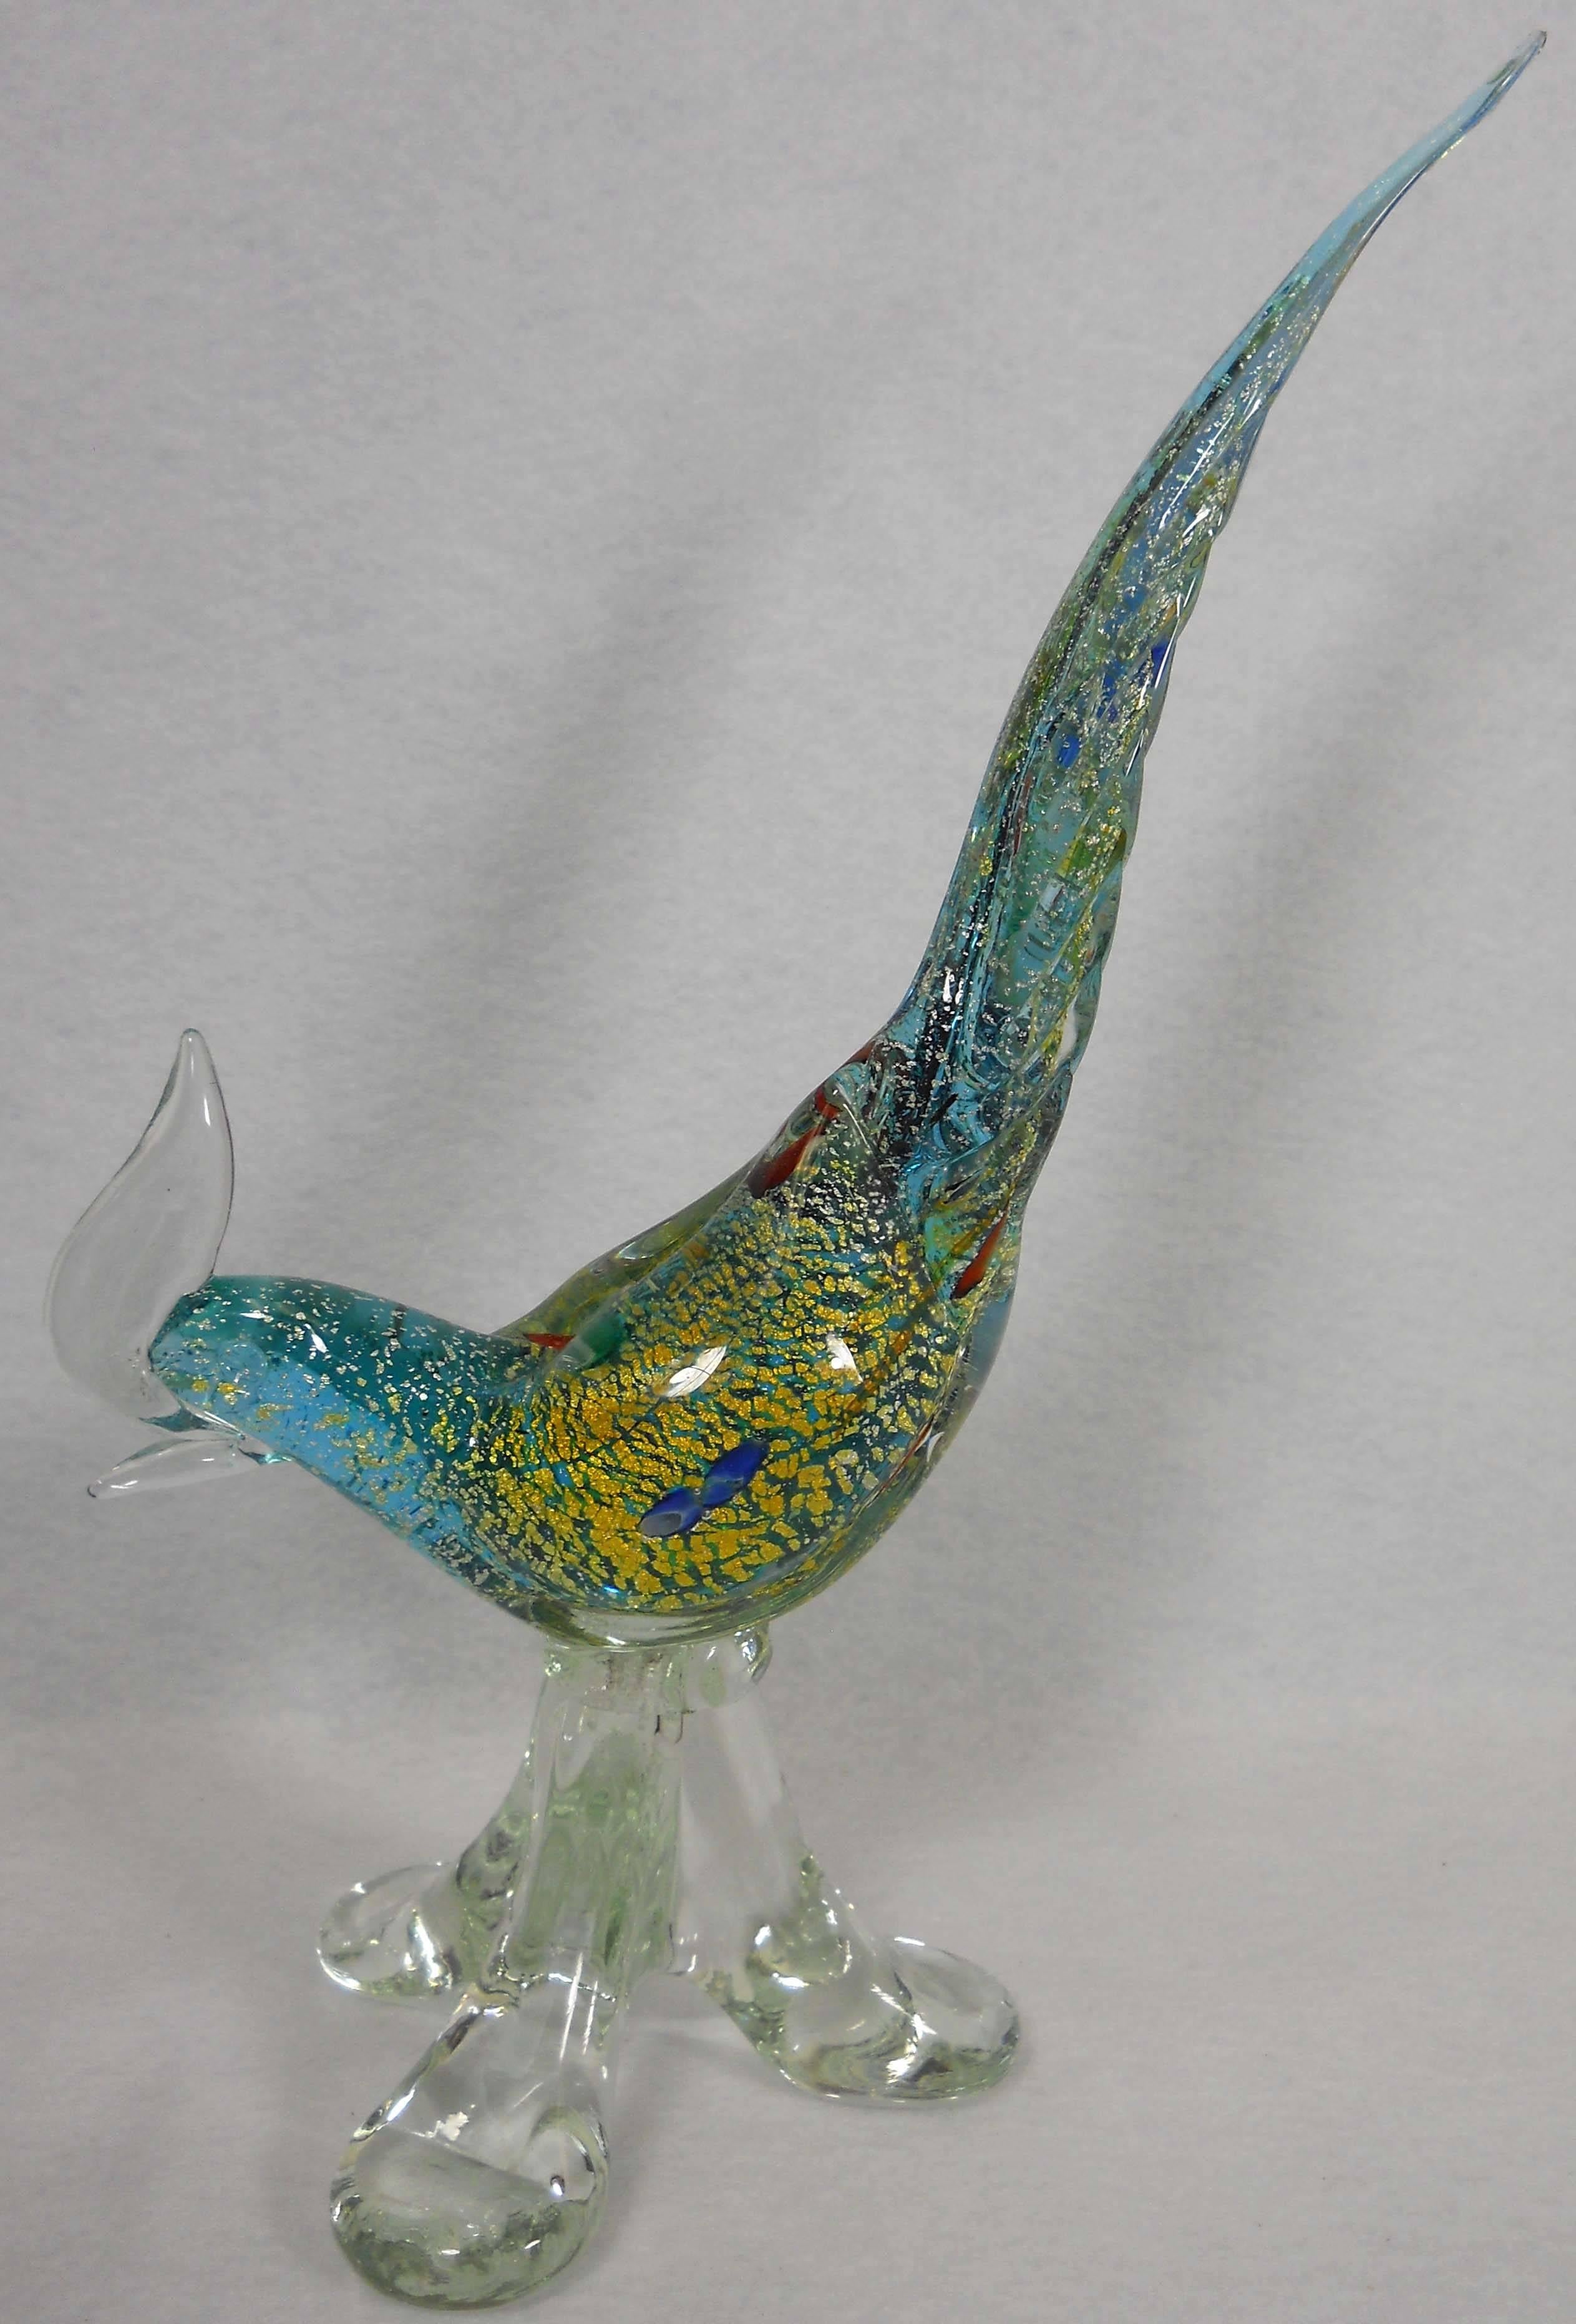 Rooster or pheasant? Pheaster? Either way, this handsome fellow was artfully created in Murano, Italy and is genuine Venetian Glass. The pheasant stands 9-3/8